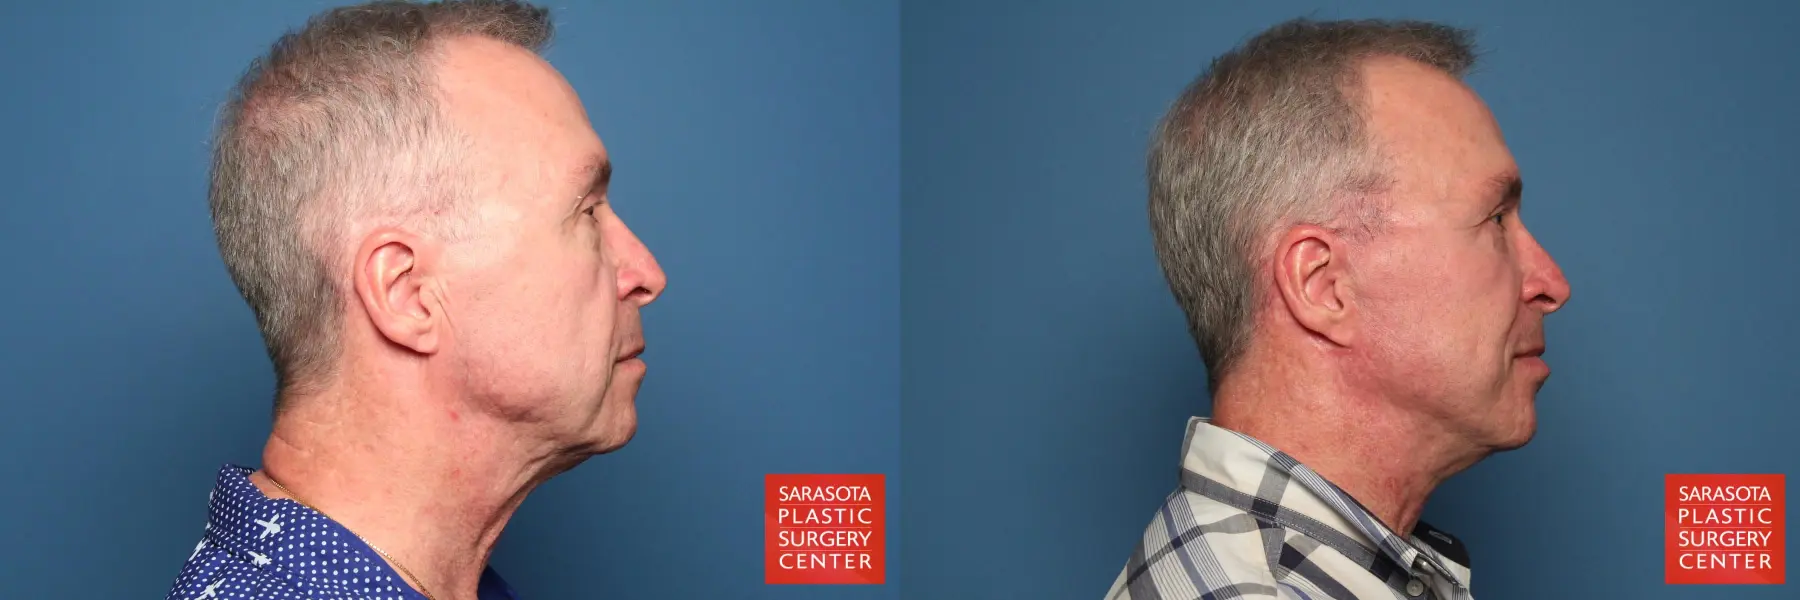 Facelift For Men Revision: Patient 1 - Before and After 3